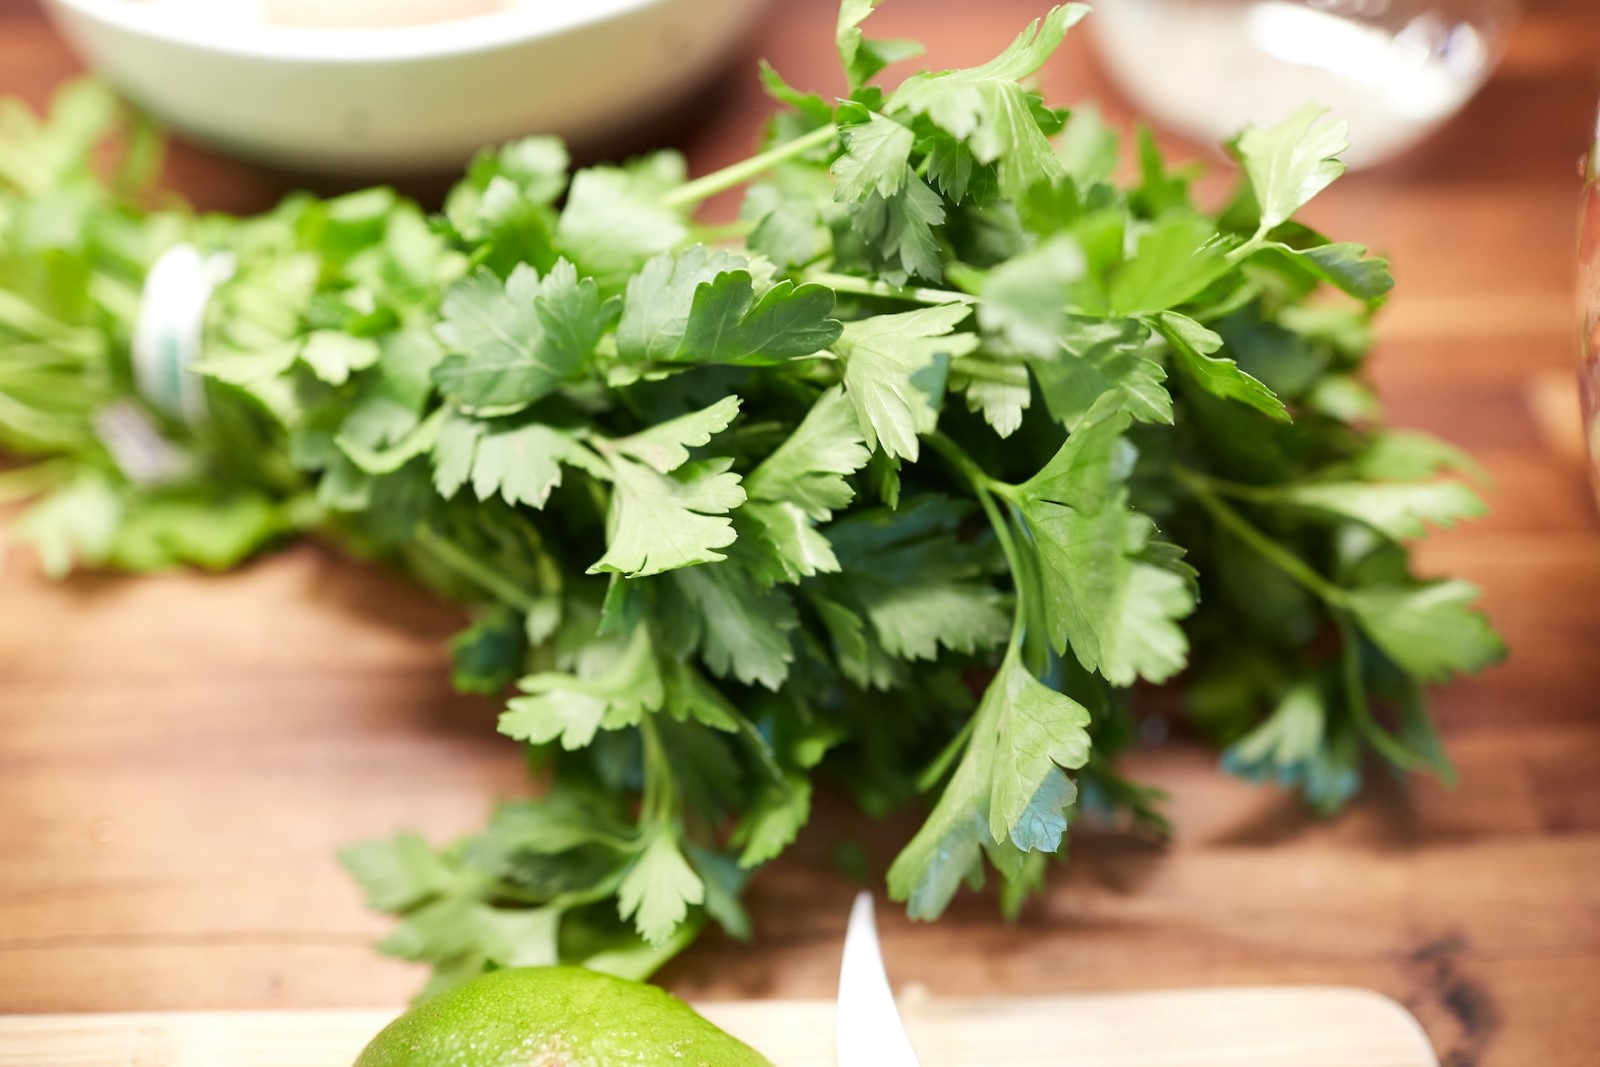 How to Dry Parsley: 5 Easy Ways